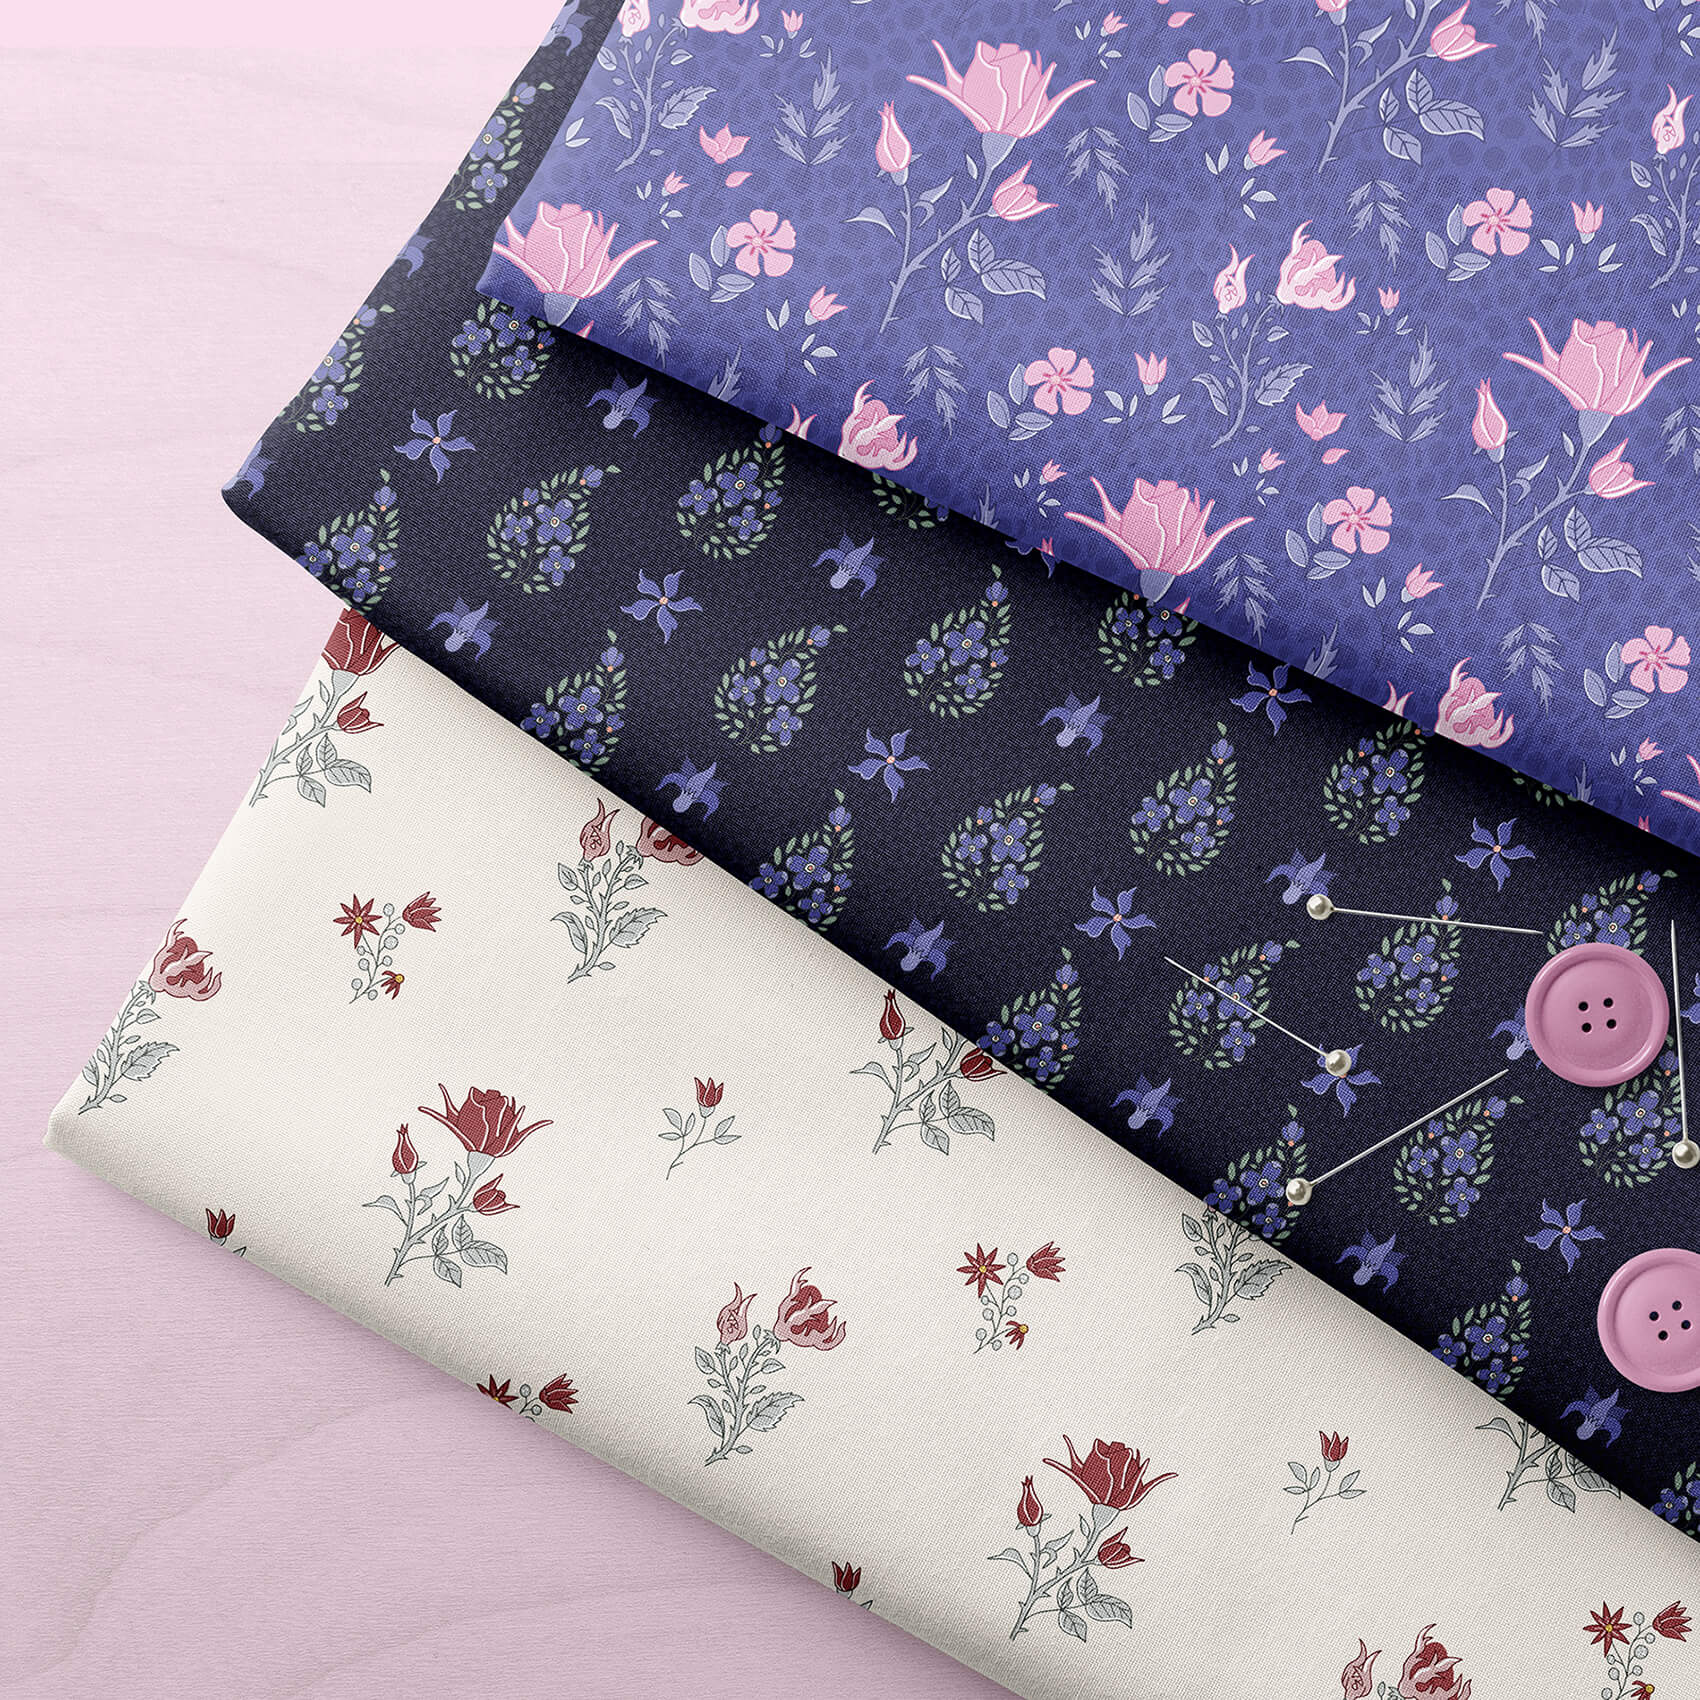 fabric stack with floral patterns